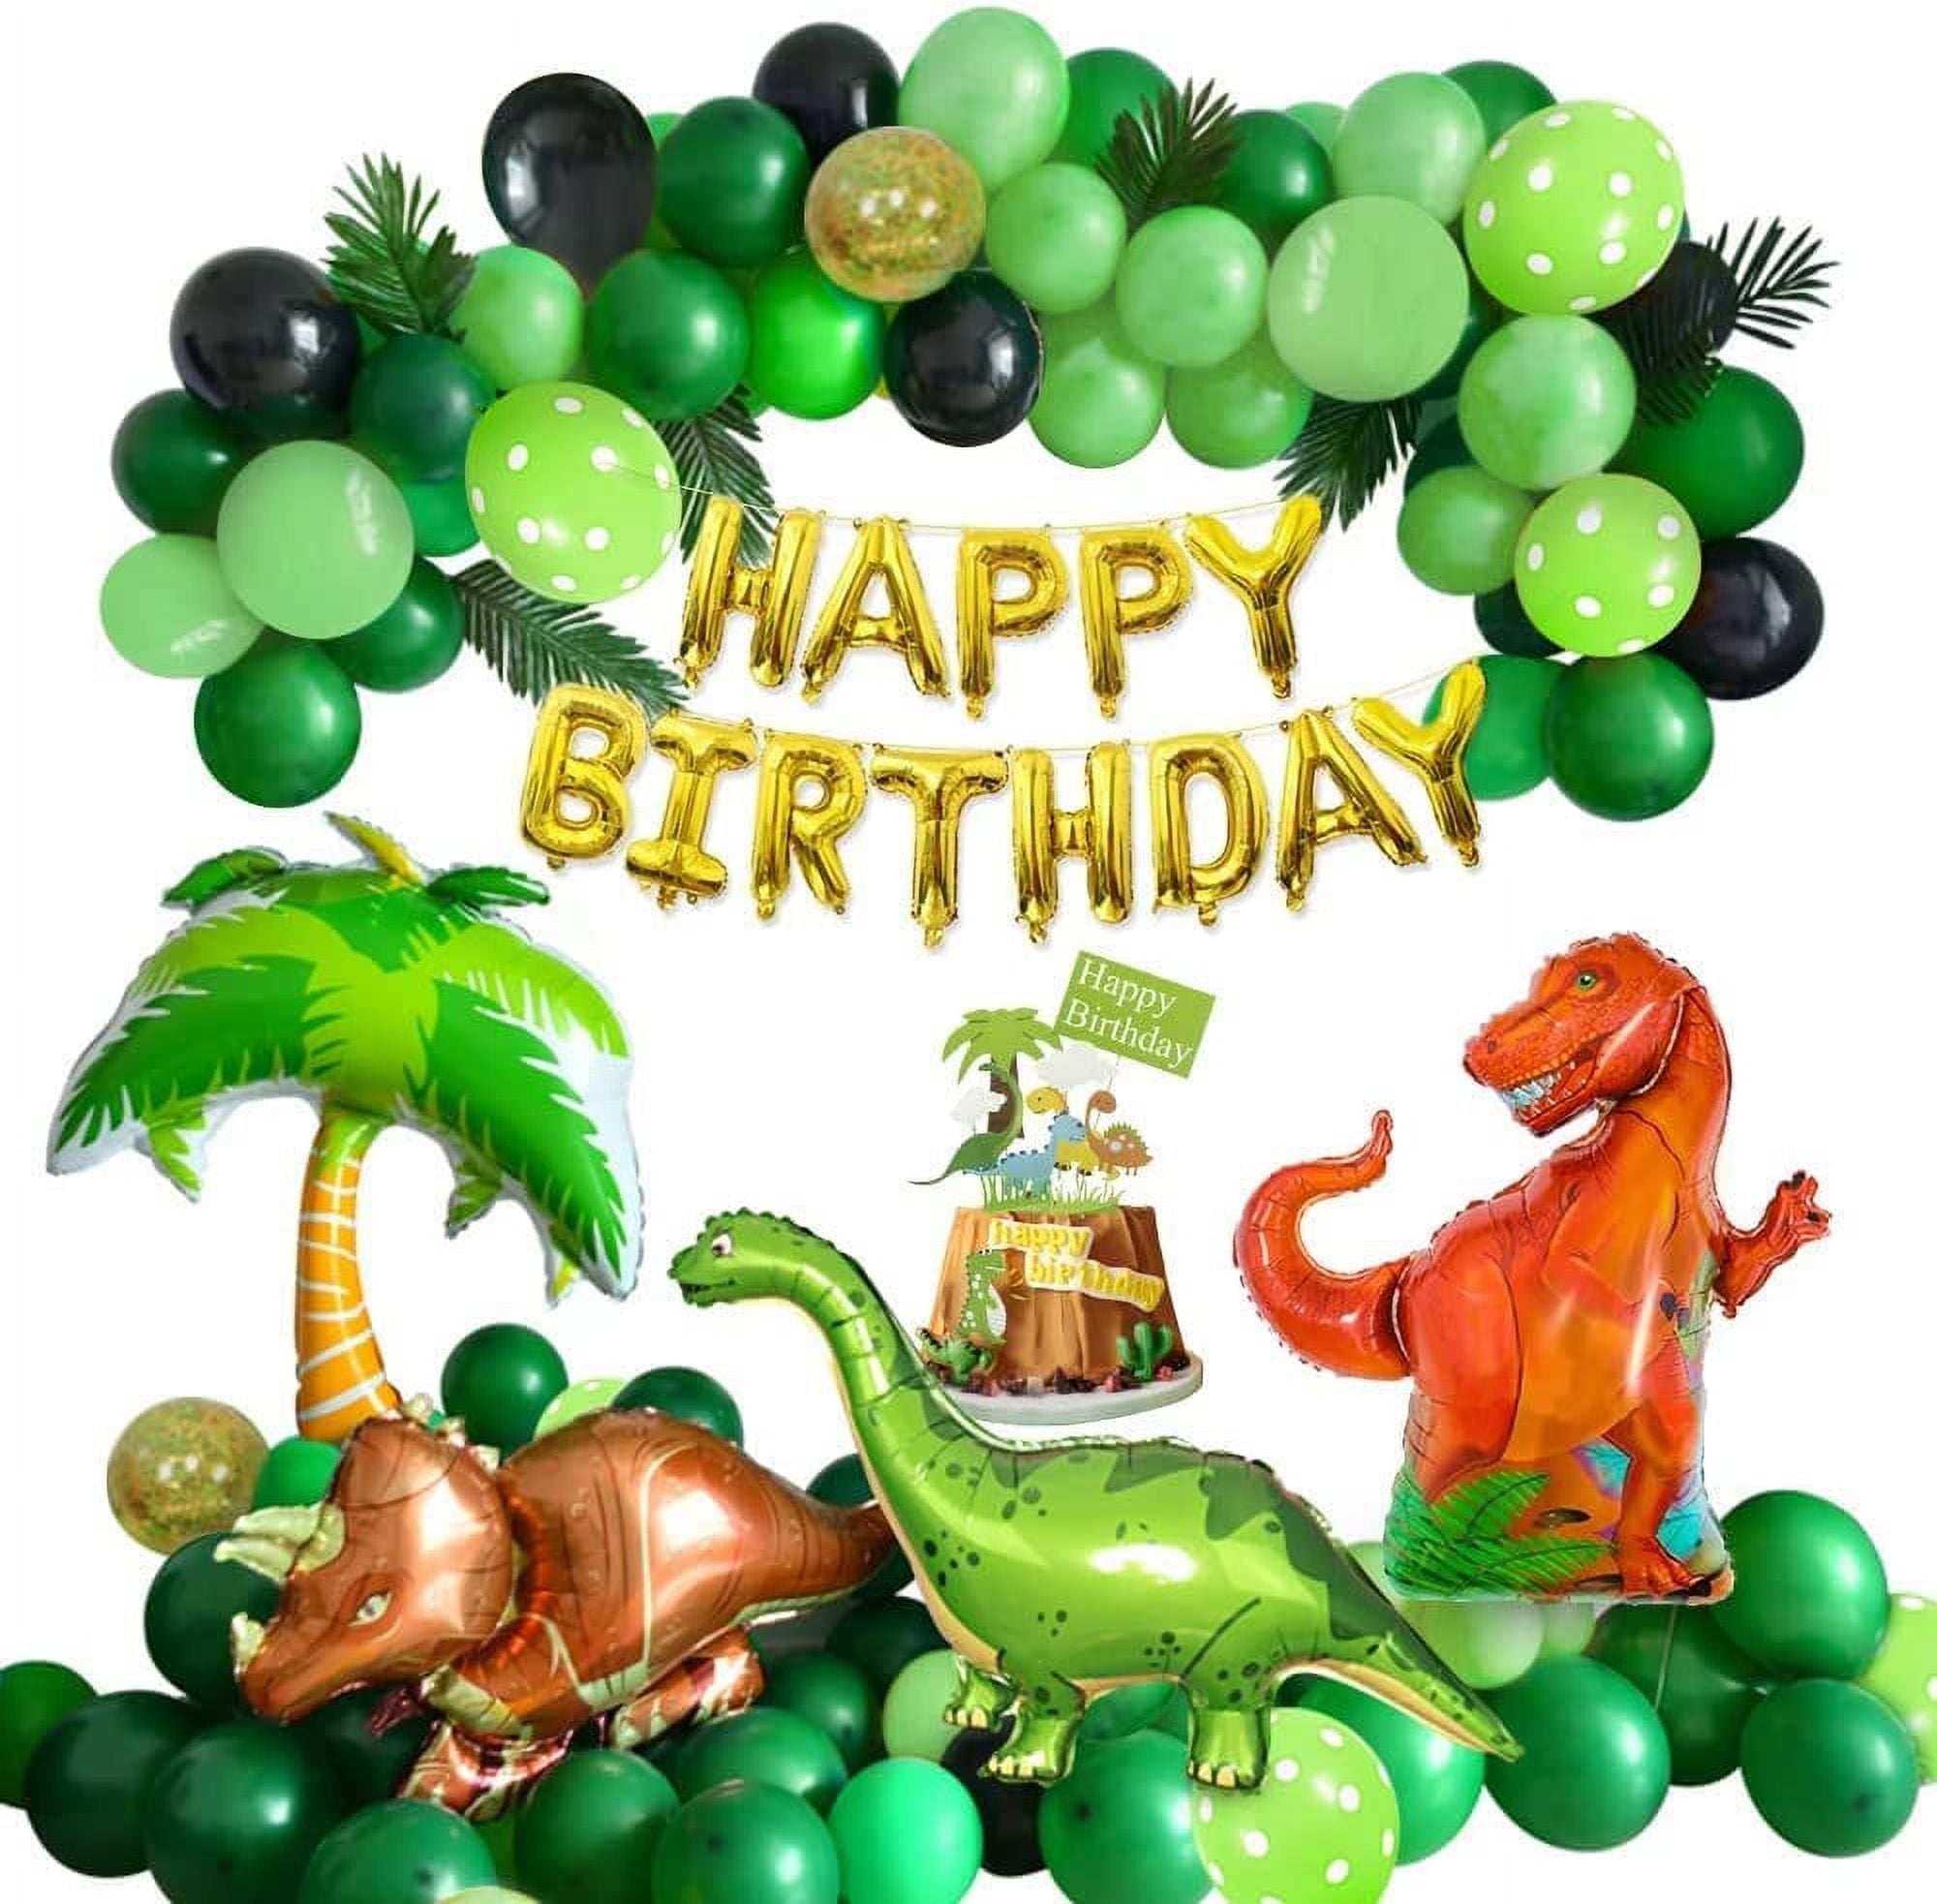 112 Pcs Dinosaur Party Favors Set for 12 Kids, Goody Bags with